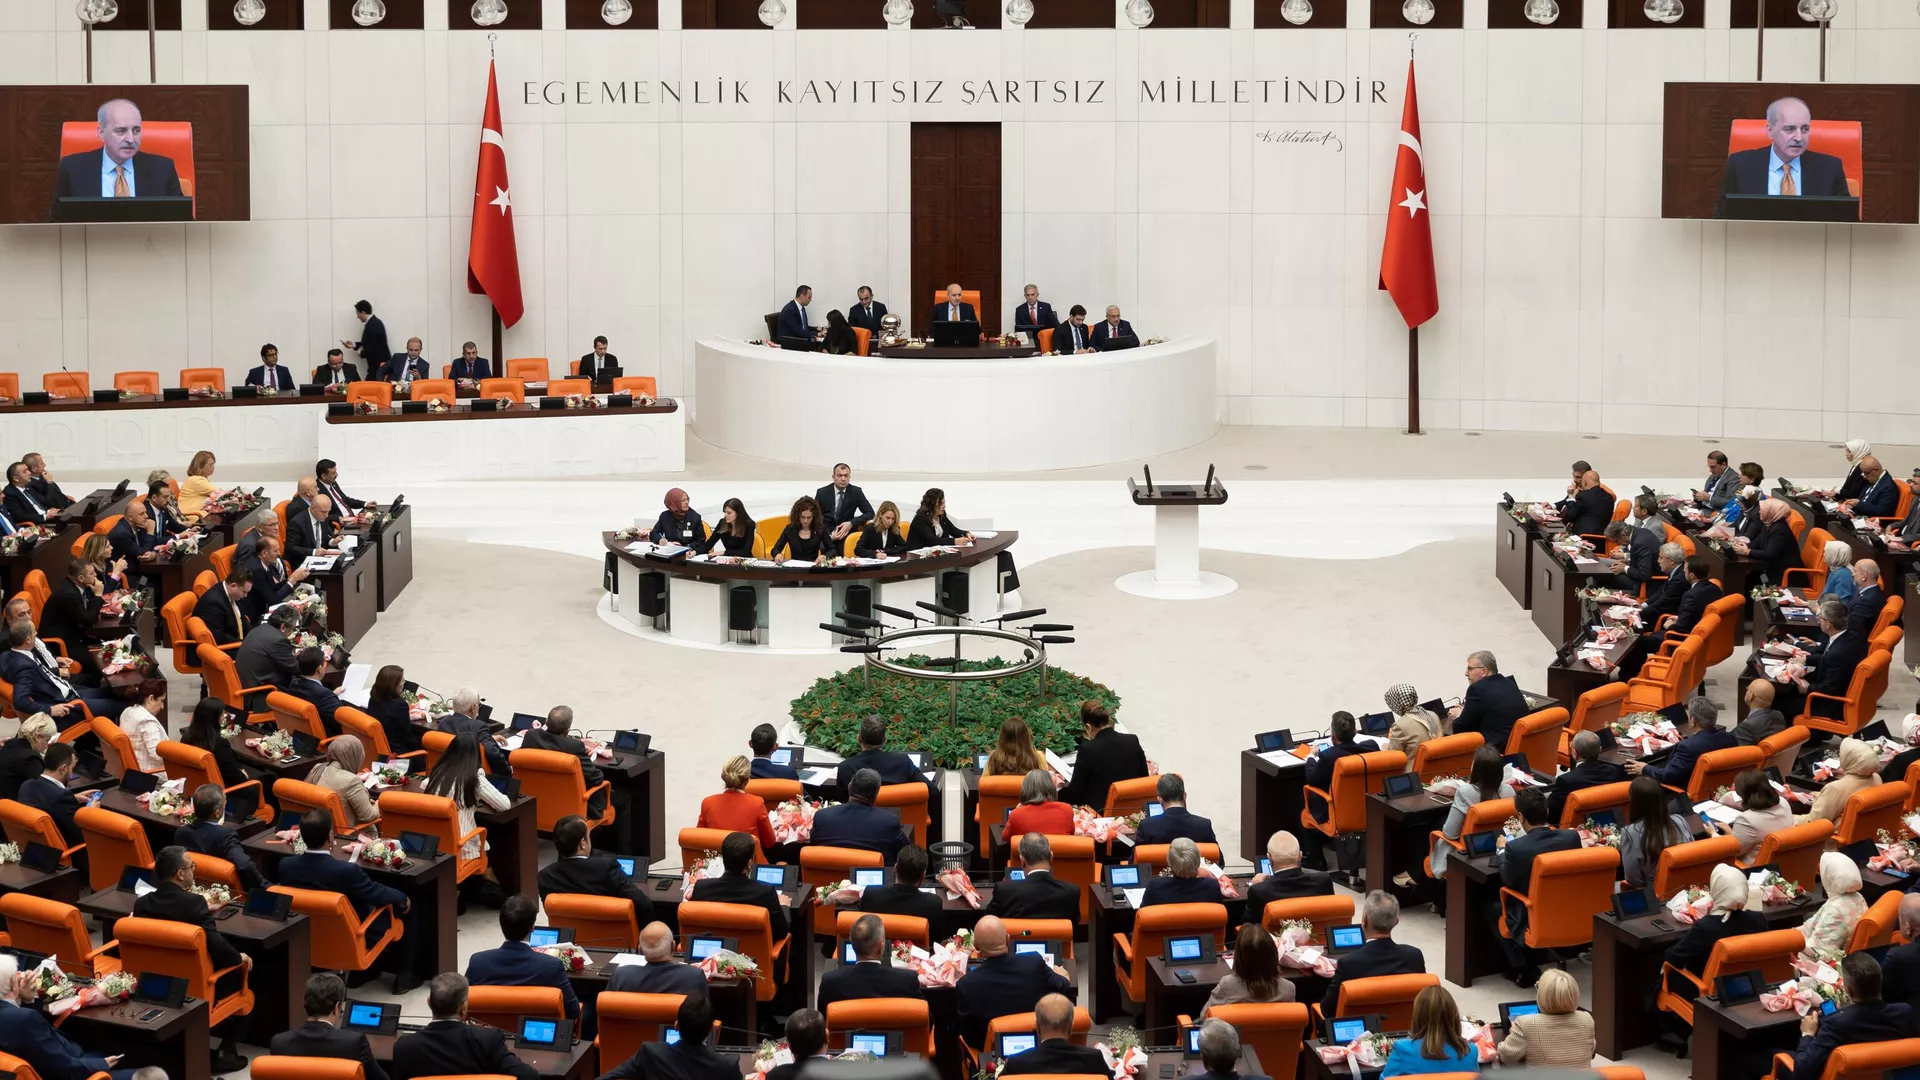 The Gulf of Aden thesis was accepted in the General Assembly of the Turkish Grand National Assembly